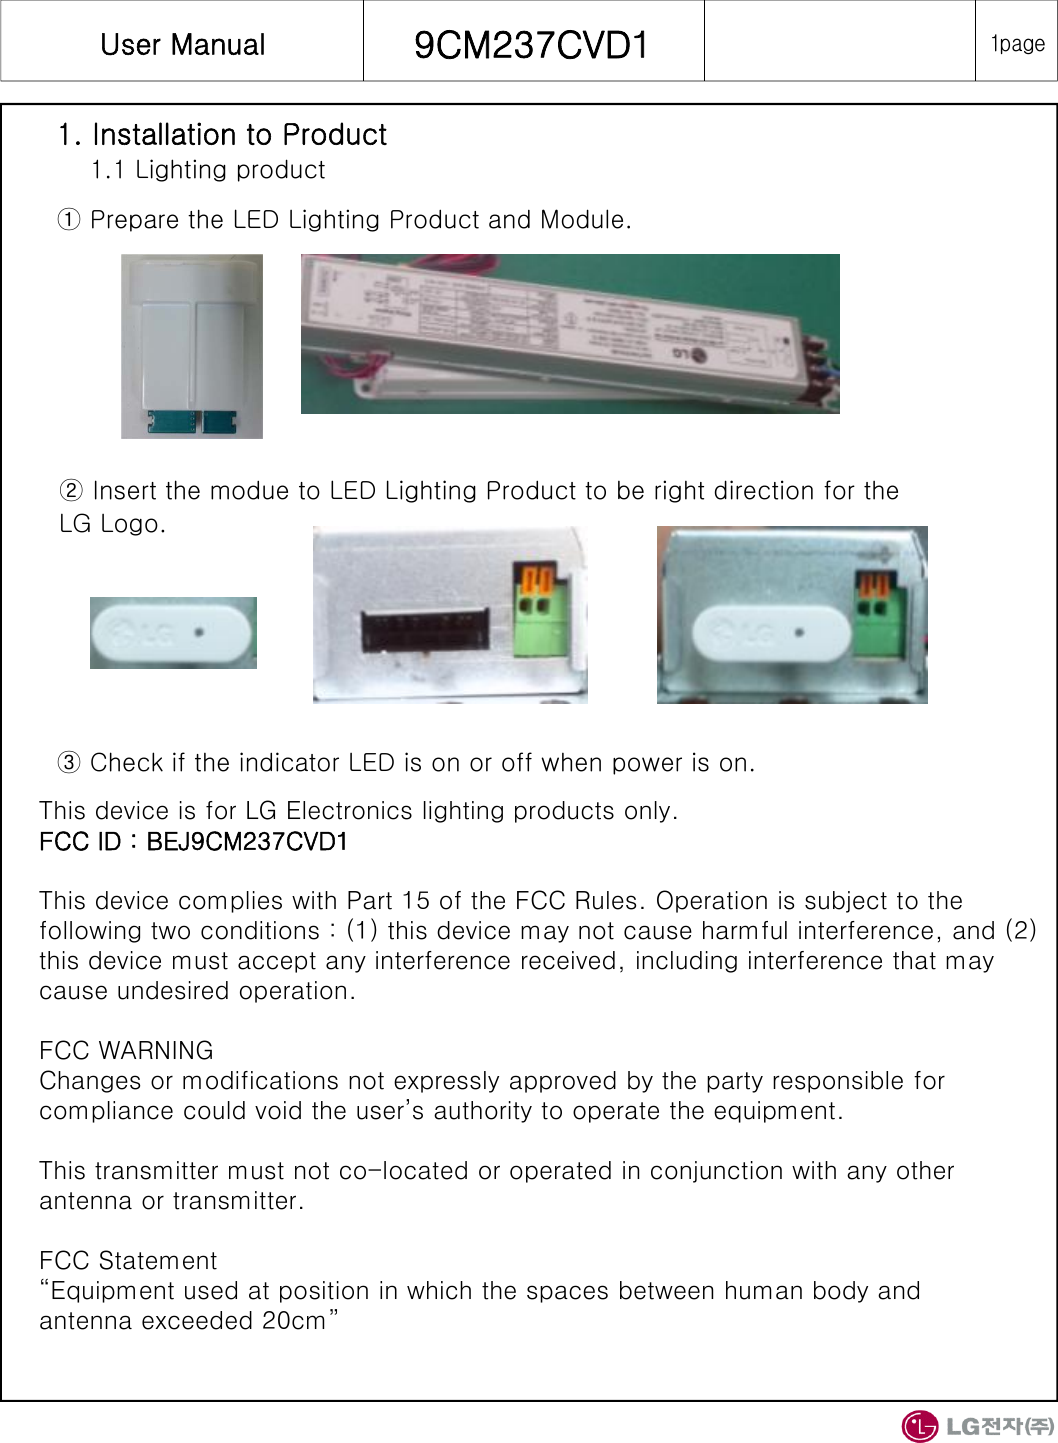 User Manual  9CM237CVD11. Installation to Product1.1 Lighting product① Prepare the LED Lighting Product and Module.1pageThis device is for LG Electronics lighting products only.FCC ID : BEJ9CM237CVD1This device complies with Part 15 of the FCC Rules. Operation is subject to the following two conditions : (1) this device may not cause harmful interference, and (2) this device must accept any interference received, including interference that may cause undesired operation.FCC WARNINGChanges or modifications not expressly approved by the party responsible for compliance could void the user’s authority to operate the equipment.This transmitter must not co-located or operated in conjunction with any other antenna or transmitter.FCC Statement“Equipment used at position in which the spaces between human body andantenna exceeded 20cm”② Insert the modue to LED Lighting Product to be right direction for the LG Logo.③ Check if the indicator LED is on or off when power is on.